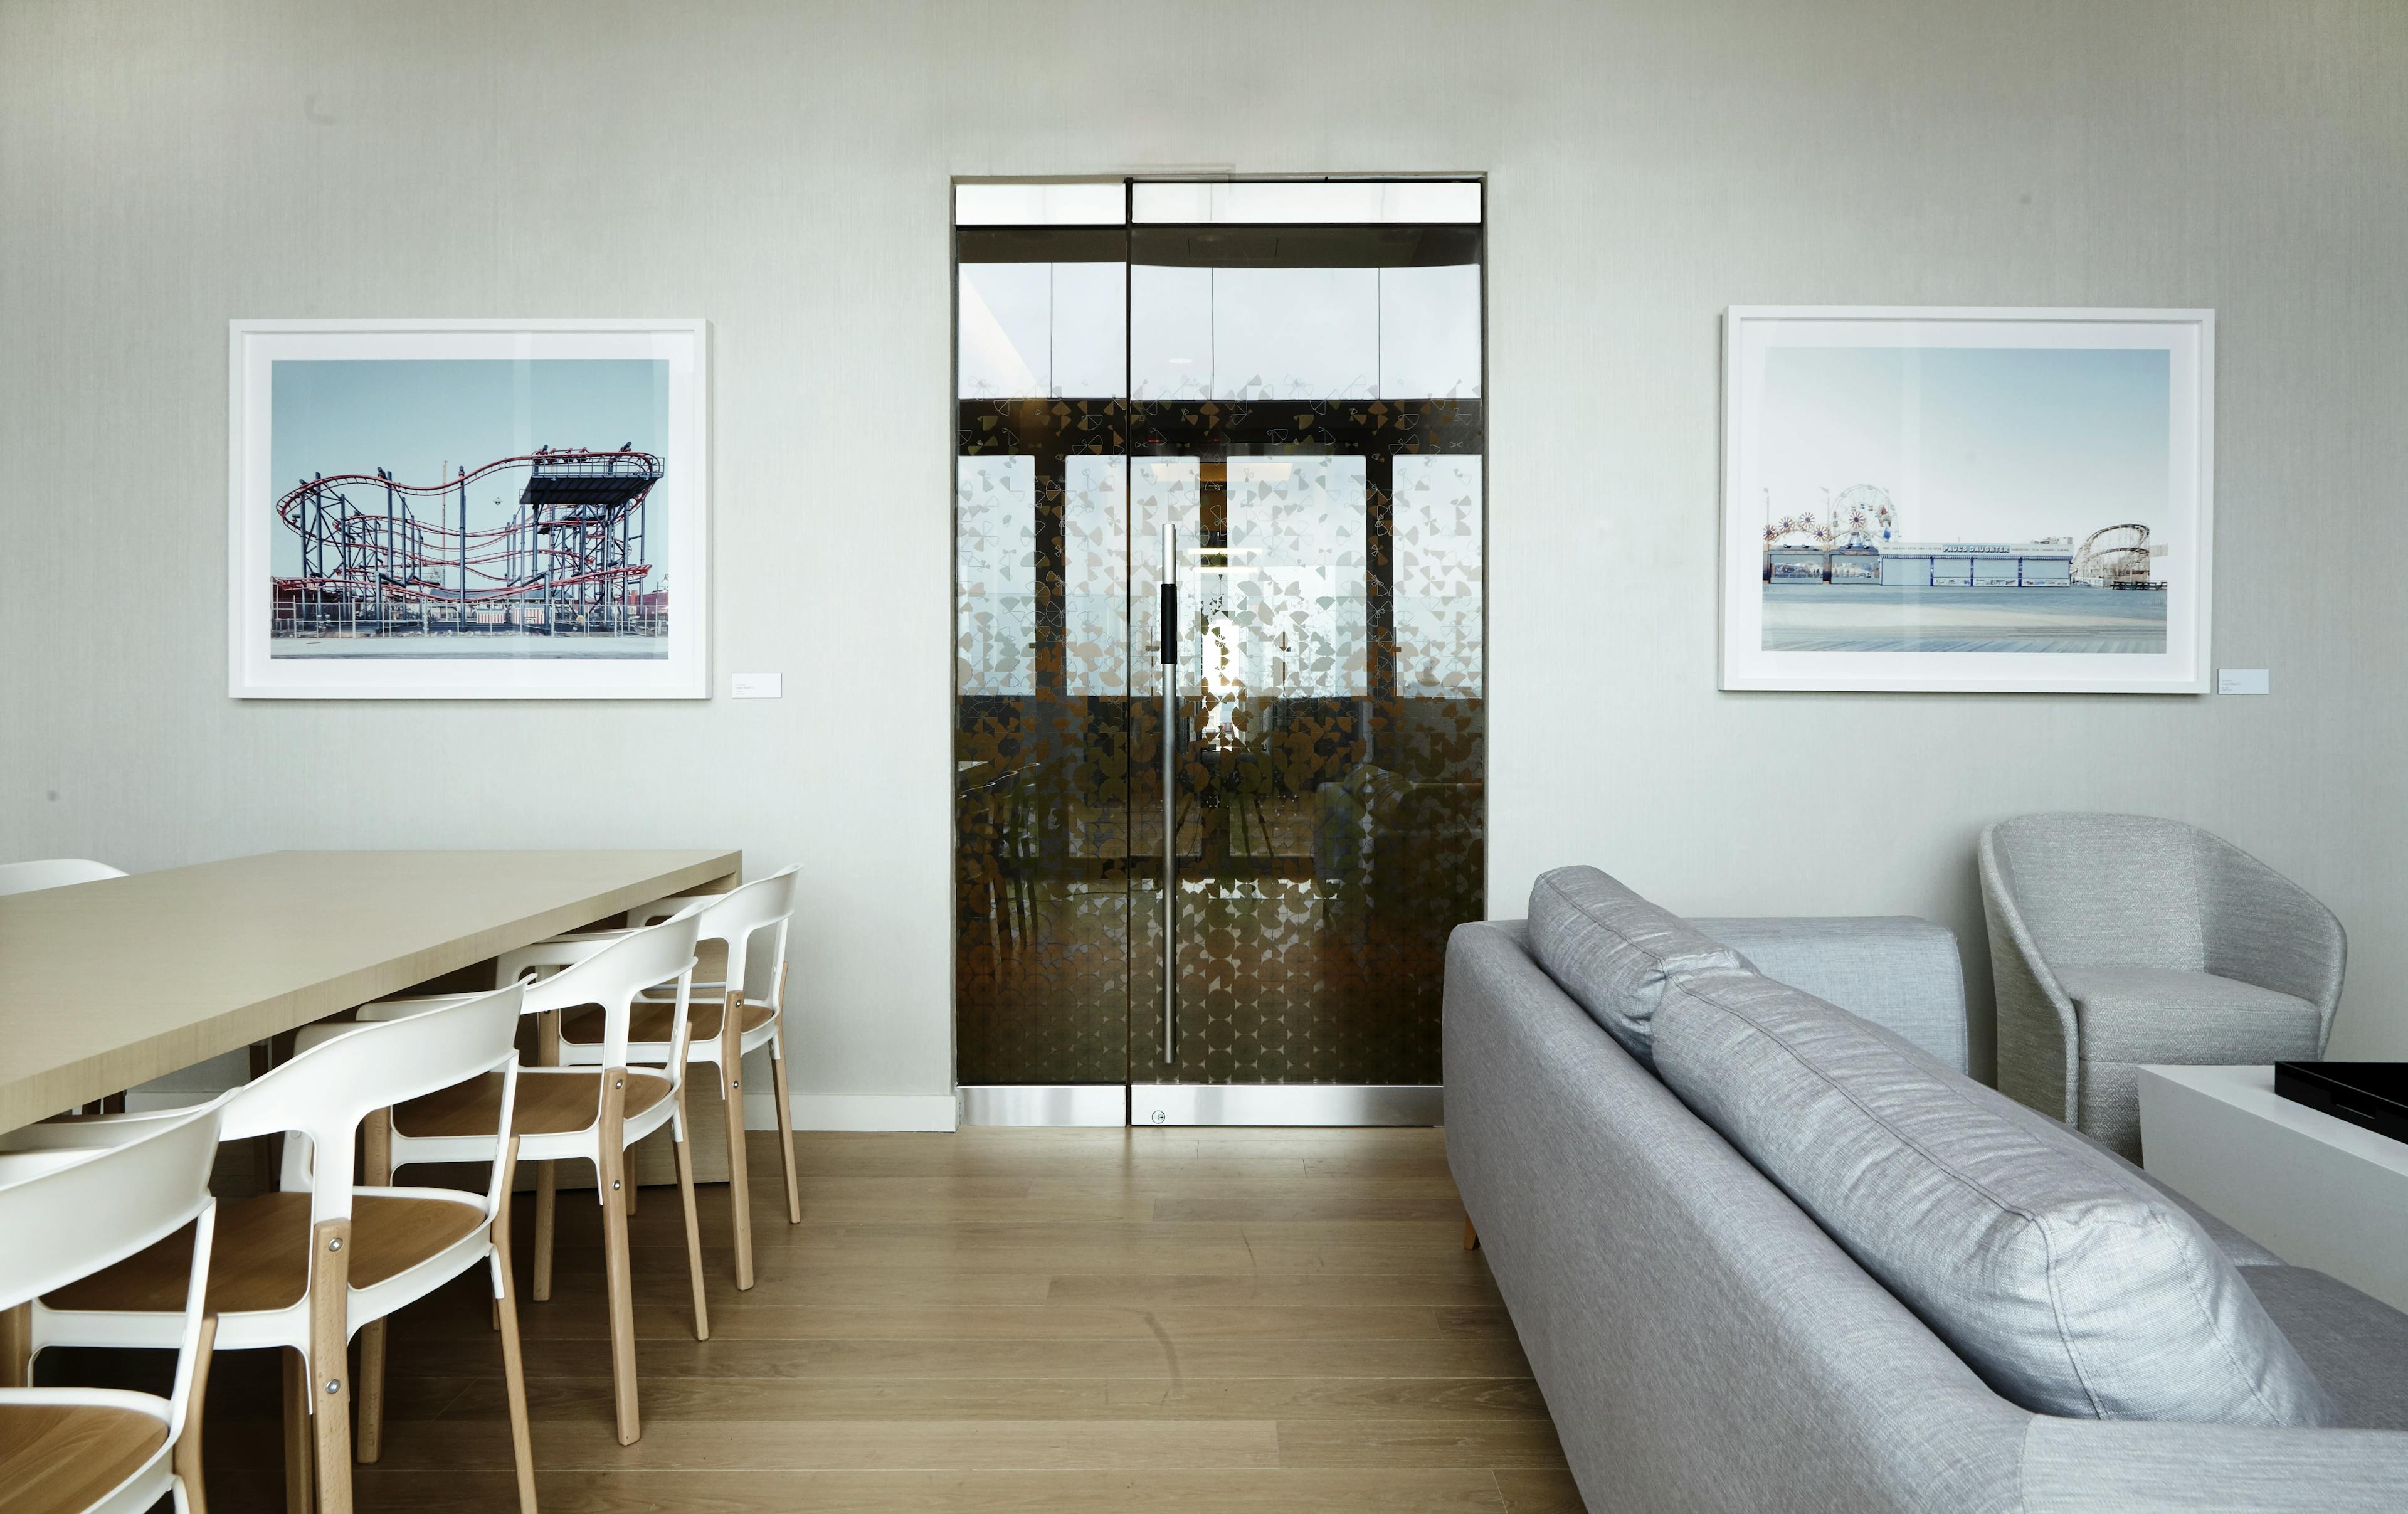 Two framed photographs of amusement parks installed on either side of a glass door in the lounge area of a residential building.